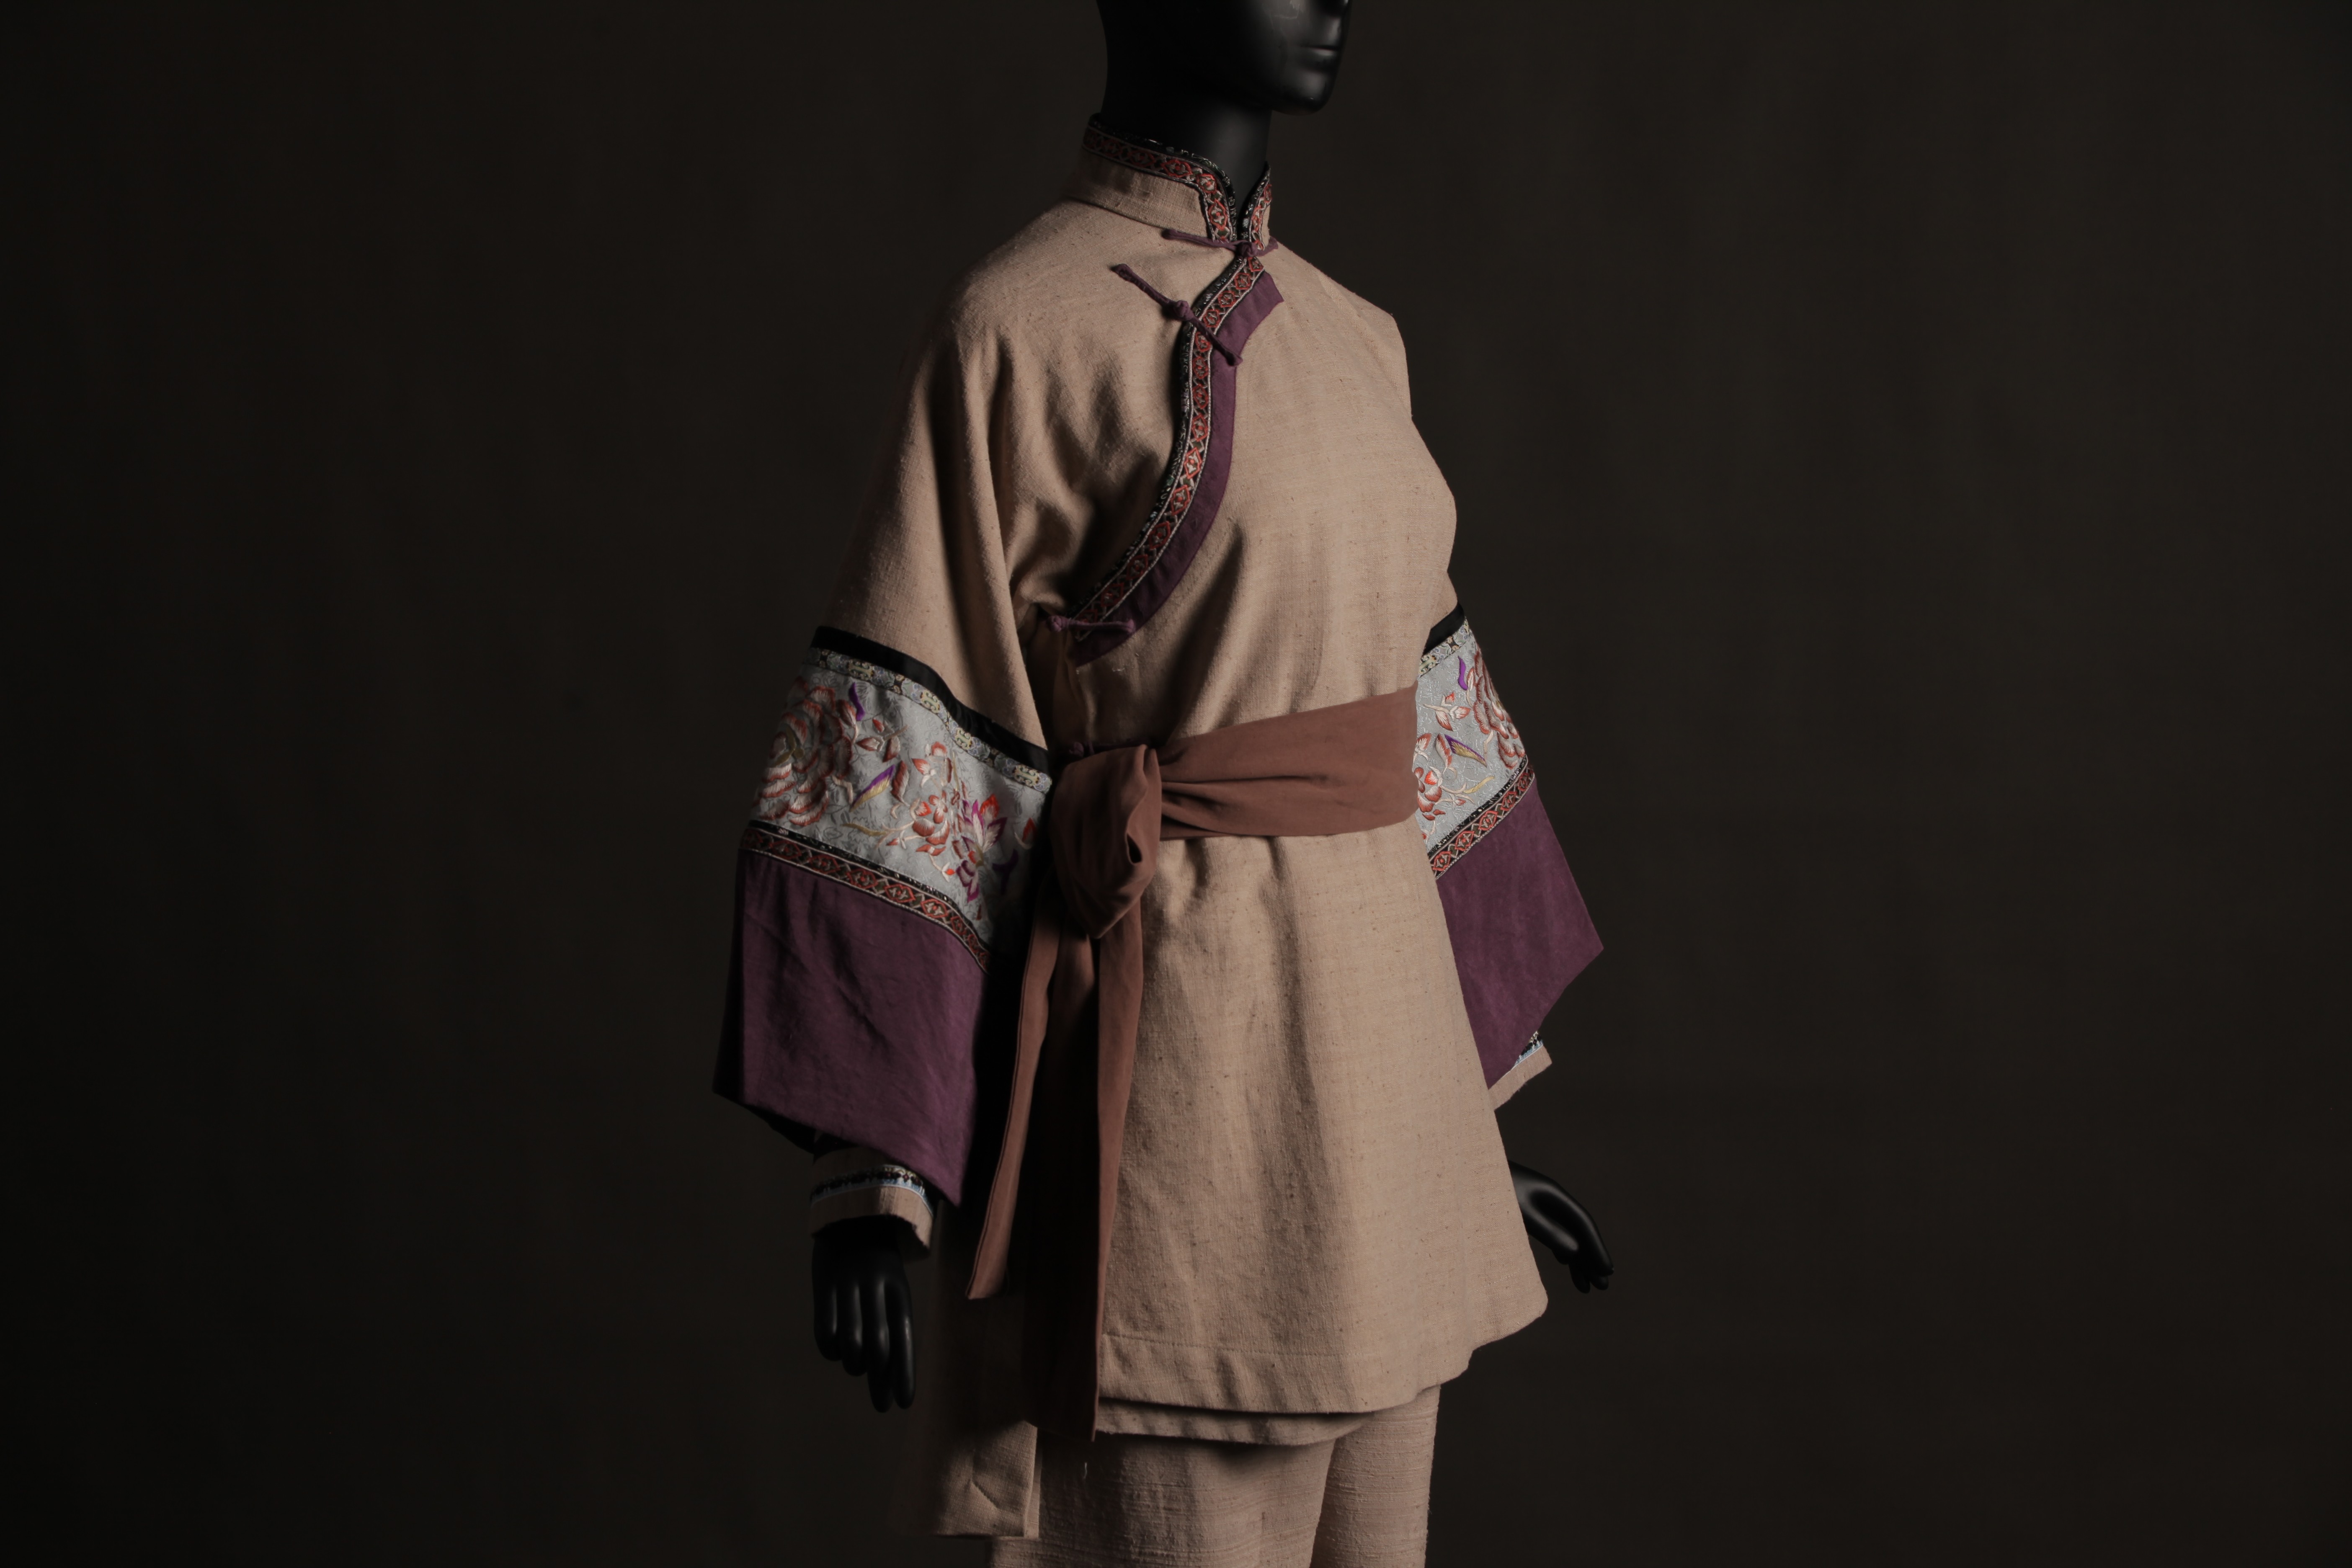 One of the costumes for the role of Yu Xiulian in the 1999 film ‘Crouching Tiger, Hidden Dragon’